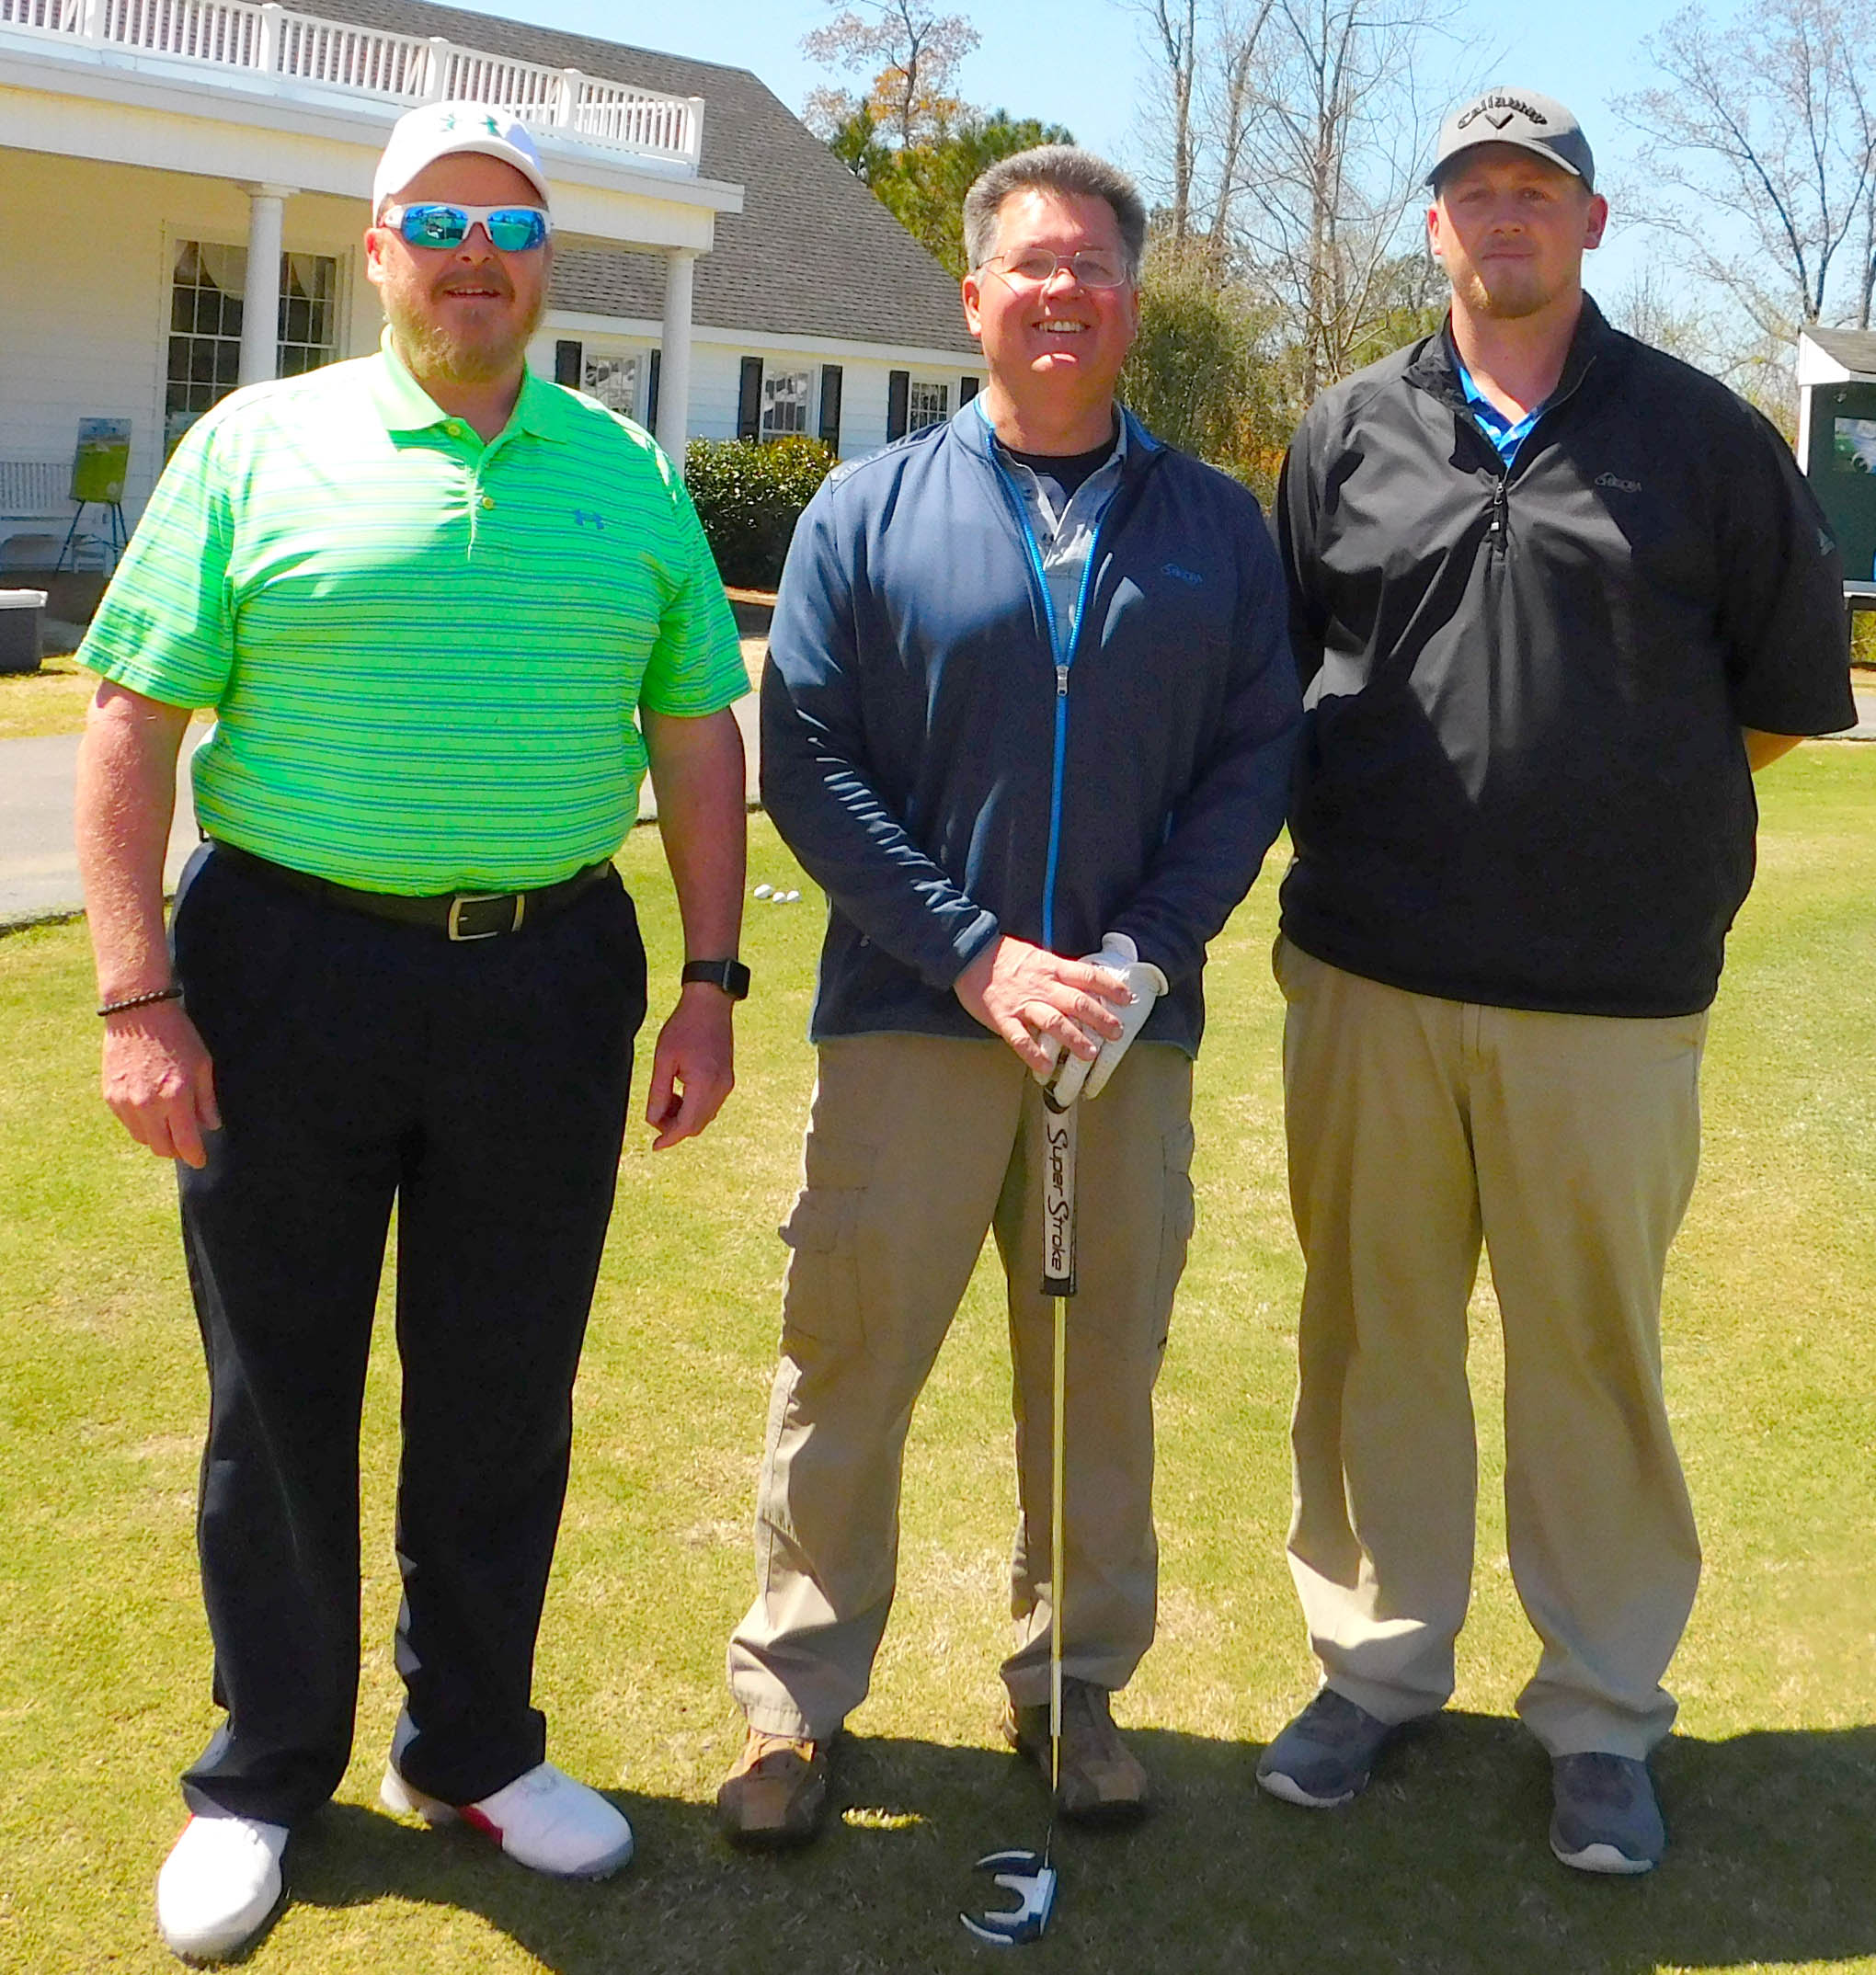 Click to enlarge,  Members of the first flight third-place team in the sixth Central Carolina Community College Foundation Harnett Golf Classic were Steven Hamby, Wallace Simmons, and Larry Shaver. For information about the Foundation, donating to it, establishing a scholarship, or other fund-raising events, contact Dr. Emily Hare, Executive Director of the CCCC Foundation, 919-718-7230. Information is also available at the CCCC Foundation website, www.cccc.edu/foundation. 